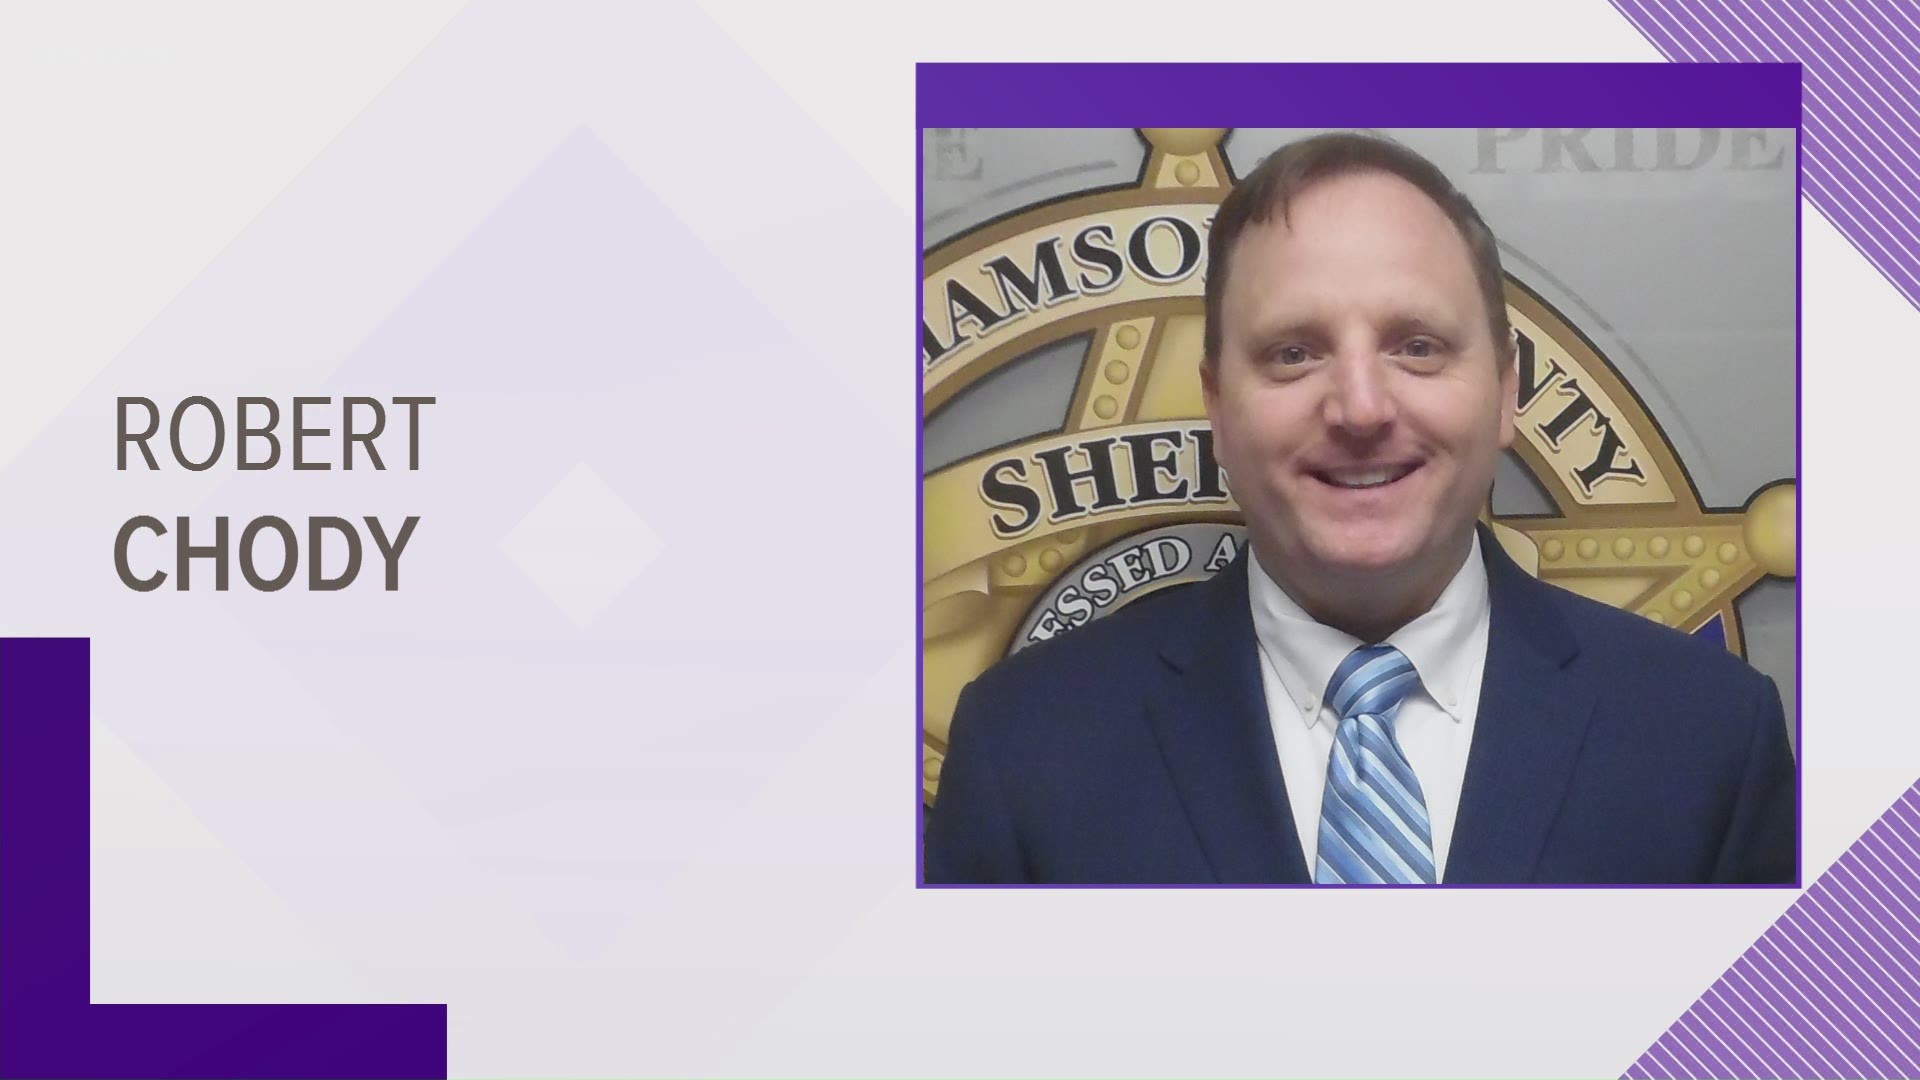 Williamson County Sheriff Robert Chody appeared before a judge on Monday for the first time since his indictment on an evidence tampering charge.